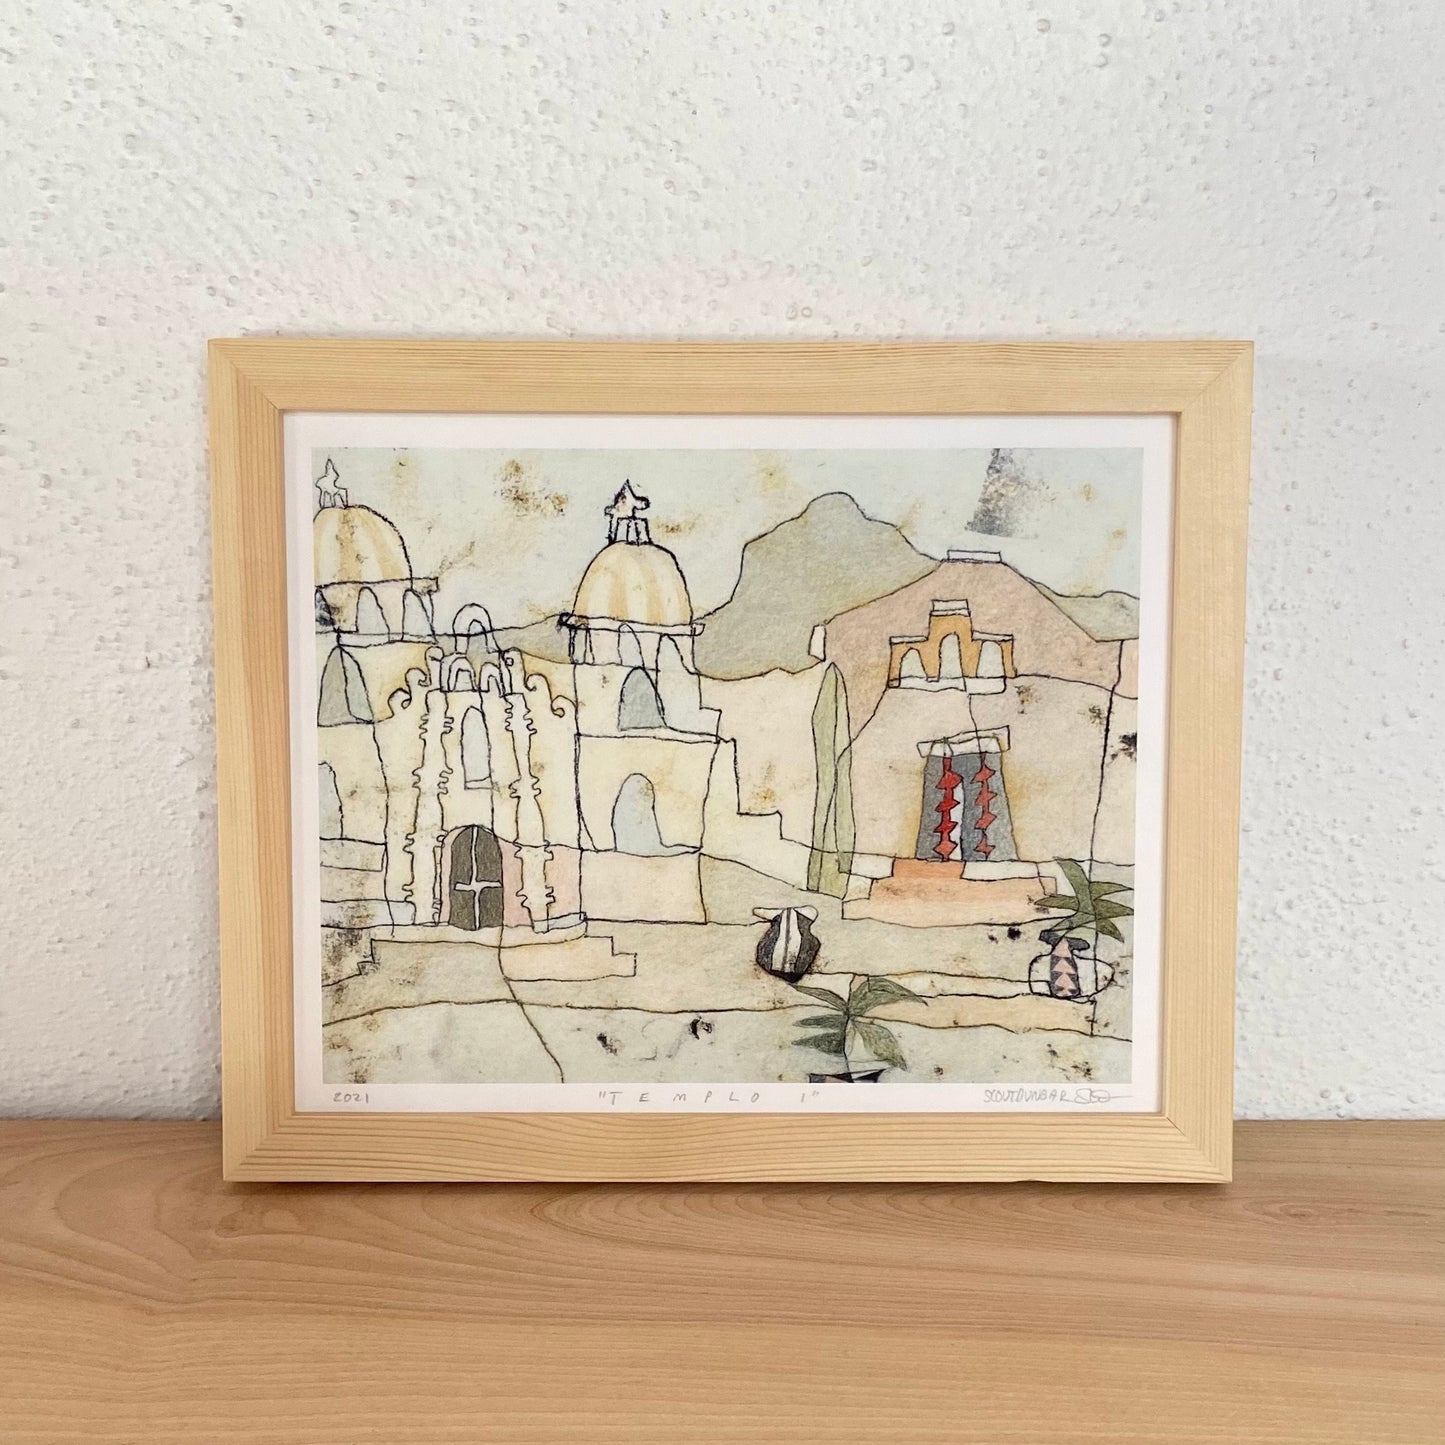 8x10 Templo I Print by Scout Dunbar. “Templo I” is a piece inspired by the Spanish Colonial architecture found in Southern Arizona and Sonora, Mexico. Made with pigment ink on textured archival cotton rag paper. Signed, titled, and dated.